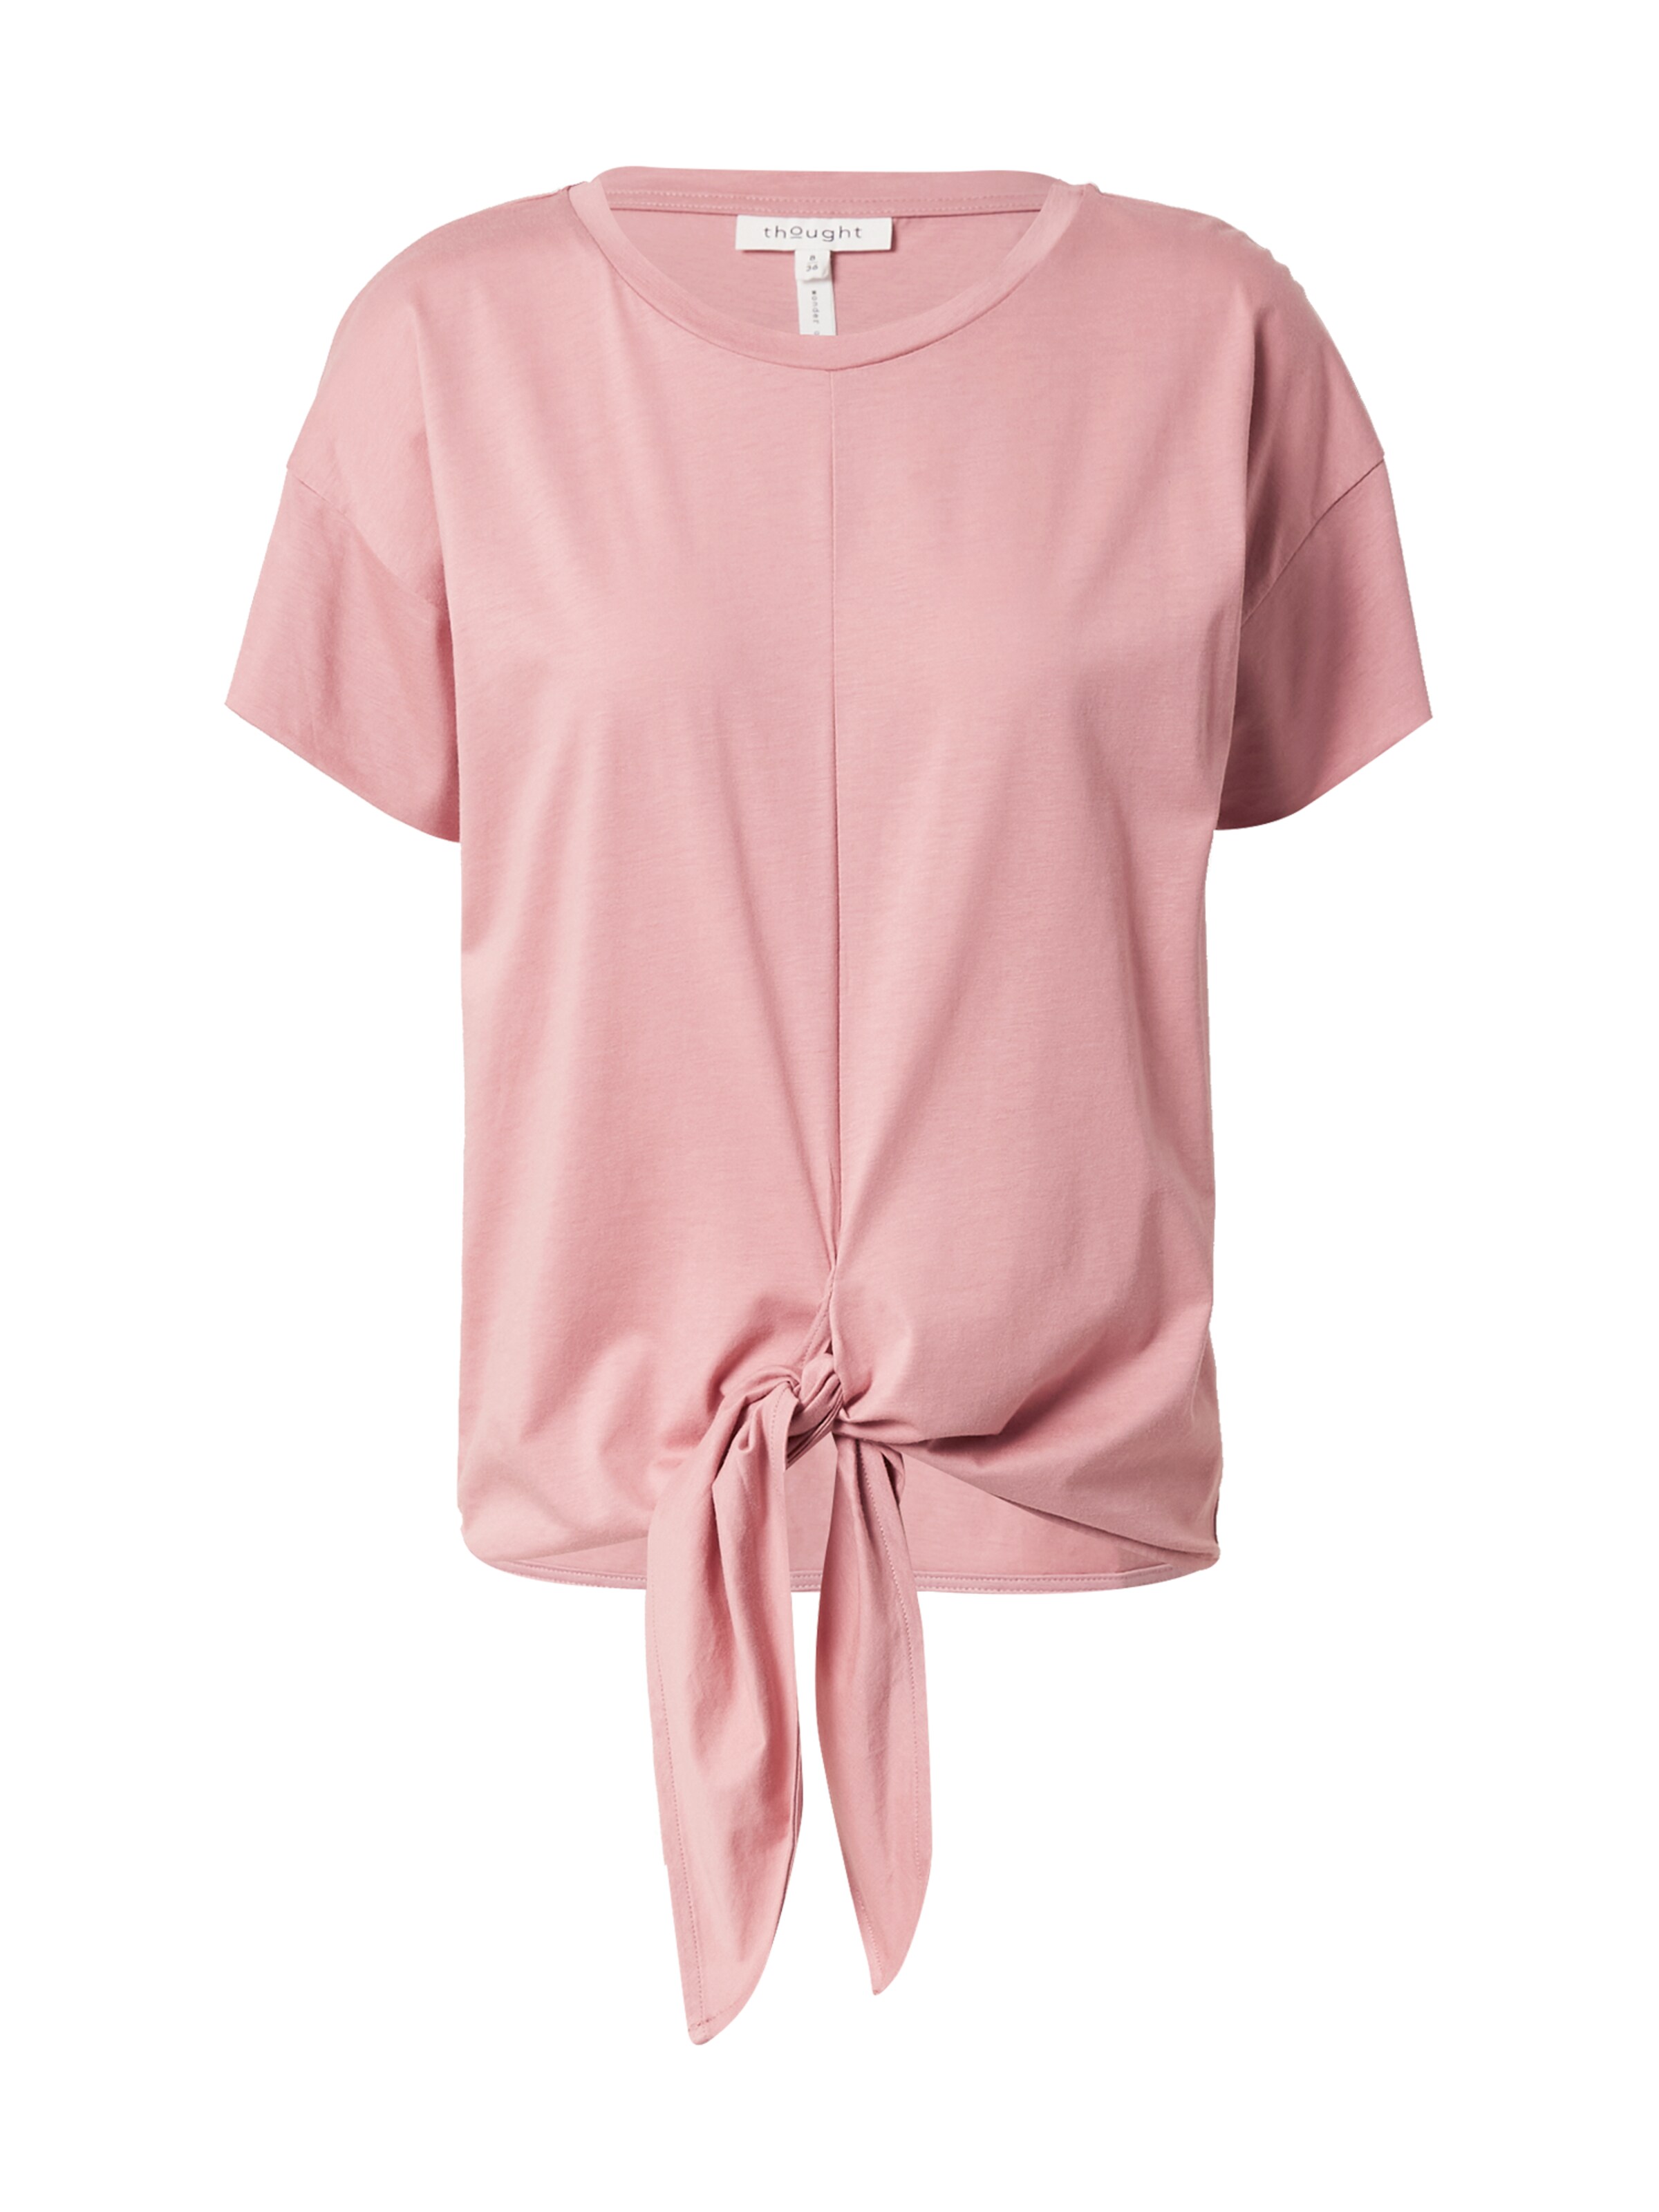 Frauen Shirts & Tops Thought T-Shirt 'Stephanie' in Pink - VG59925